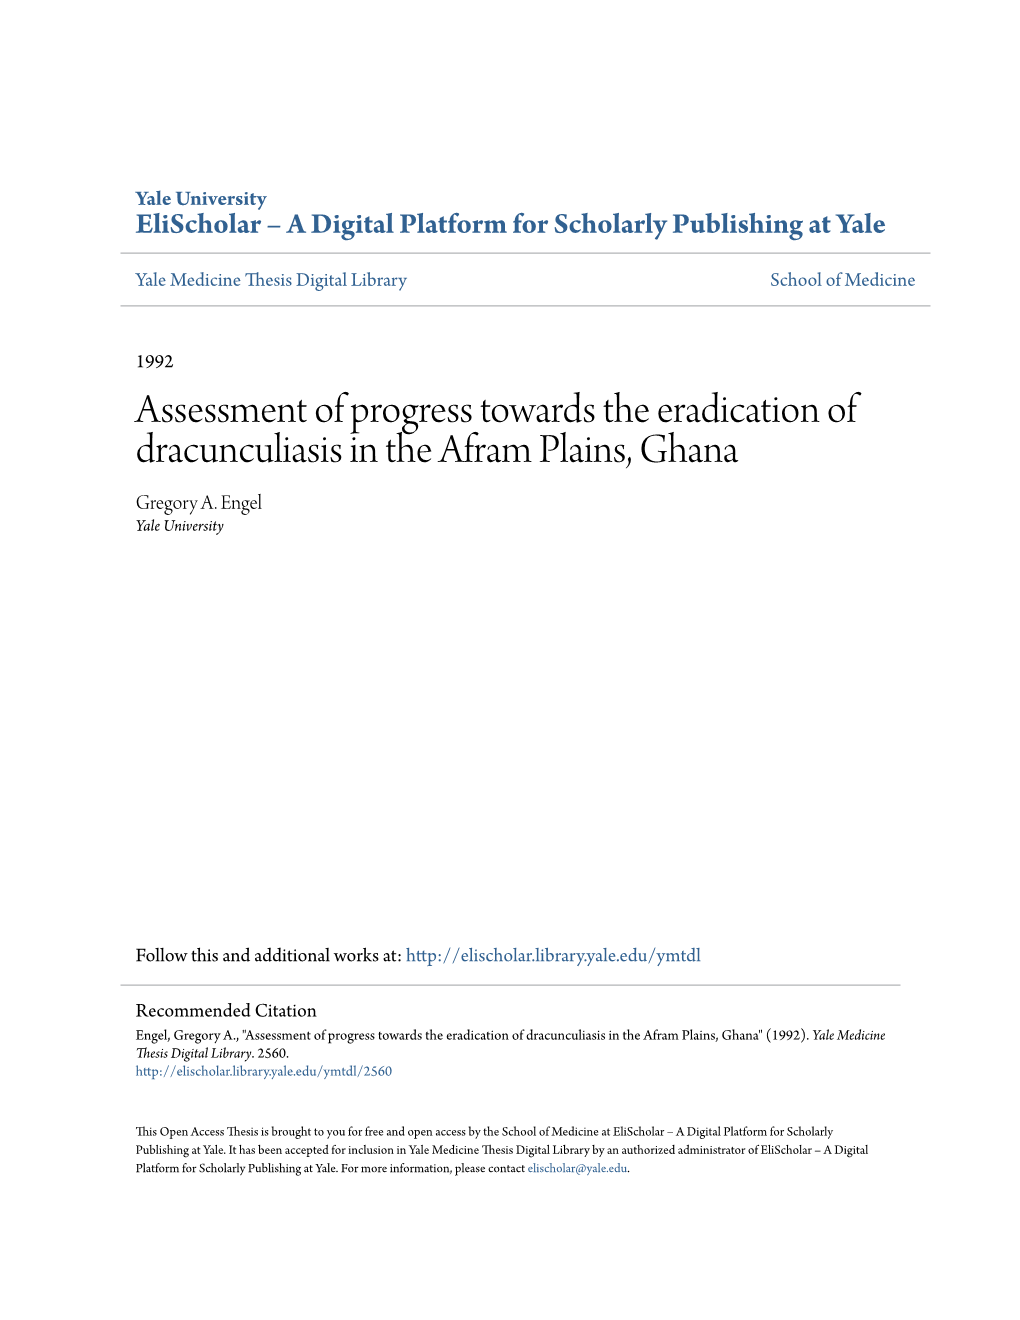 Assessment of Progress Towards the Eradication of Dracunculiasis in the Afram Plains, Ghana Gregory A